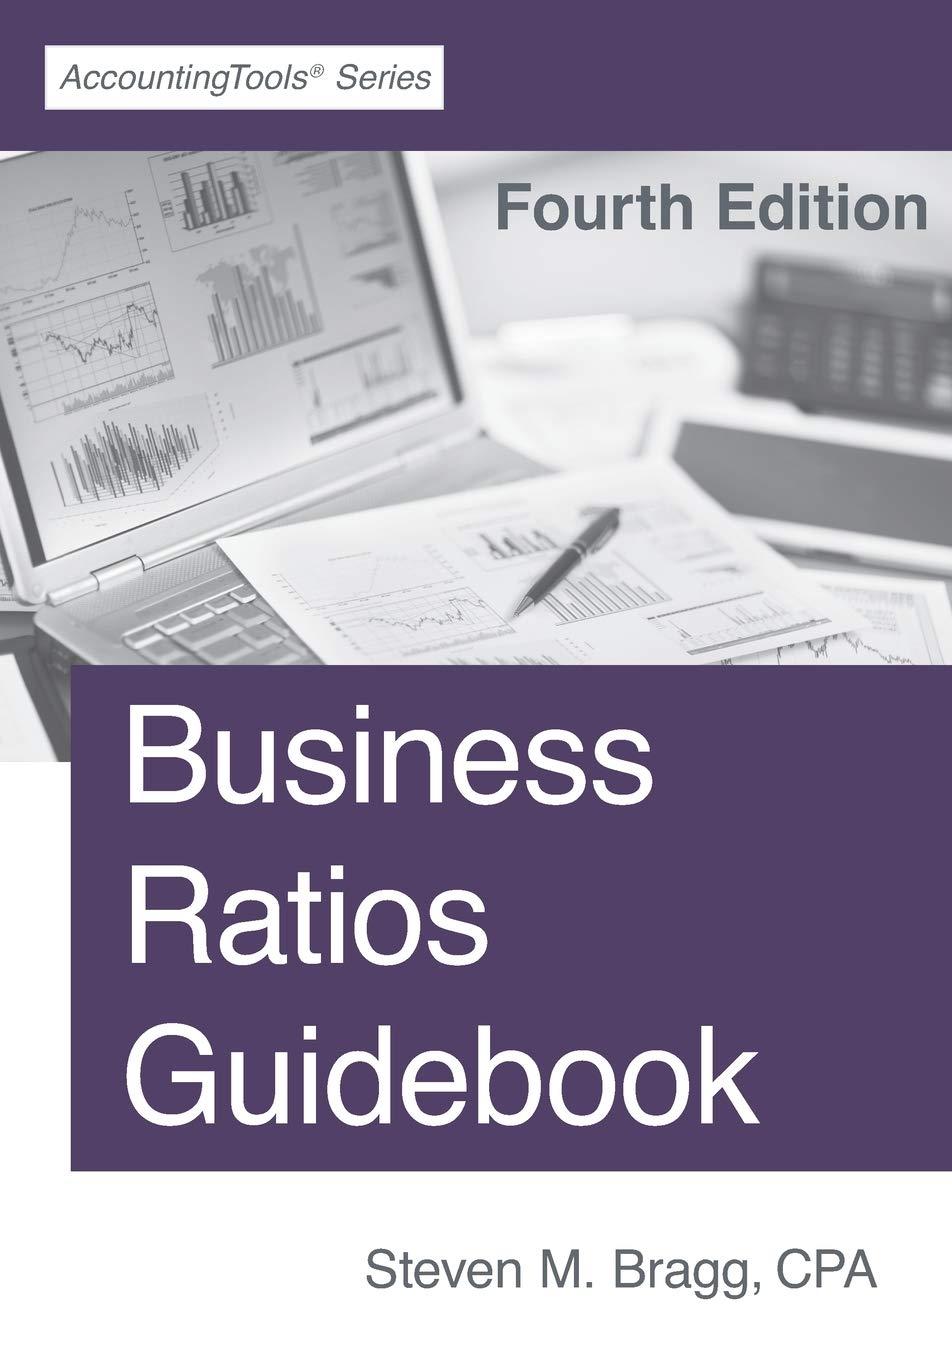 business ratios guidebook 4th edition steven m. bragg 1642210552, 978-1642210552